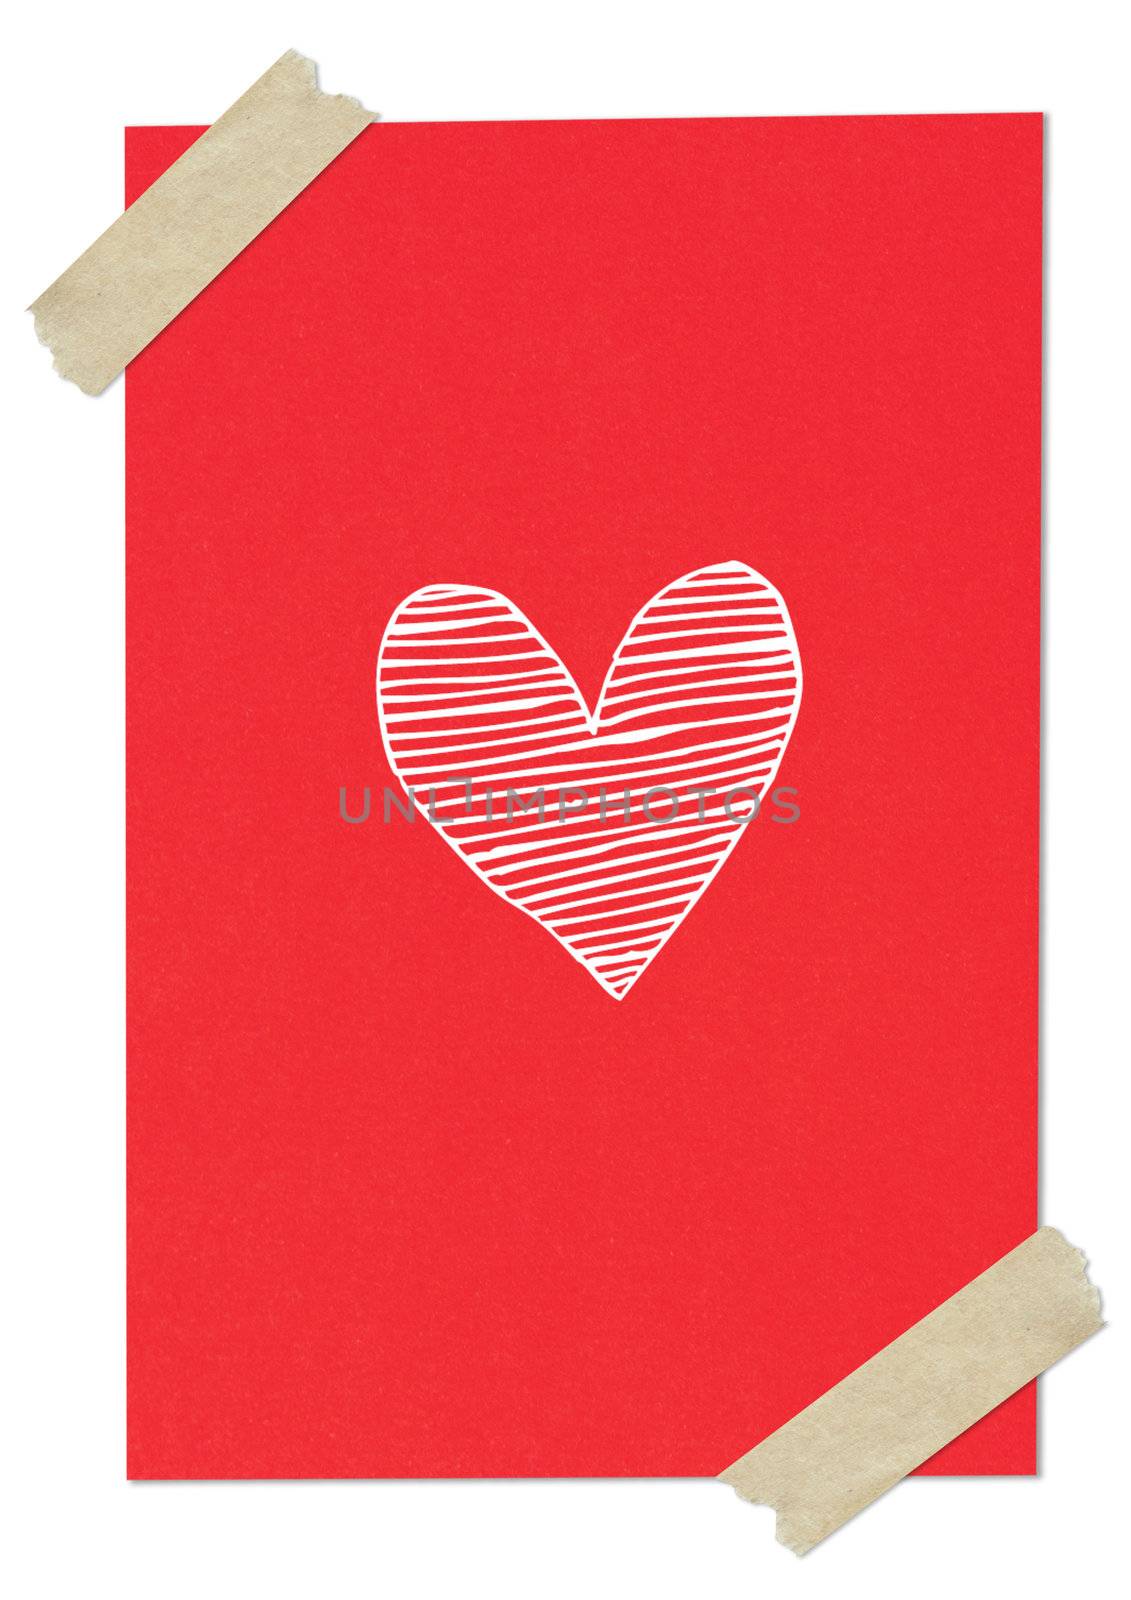 Handwriting heart shape on red paper with tape by nuchylee